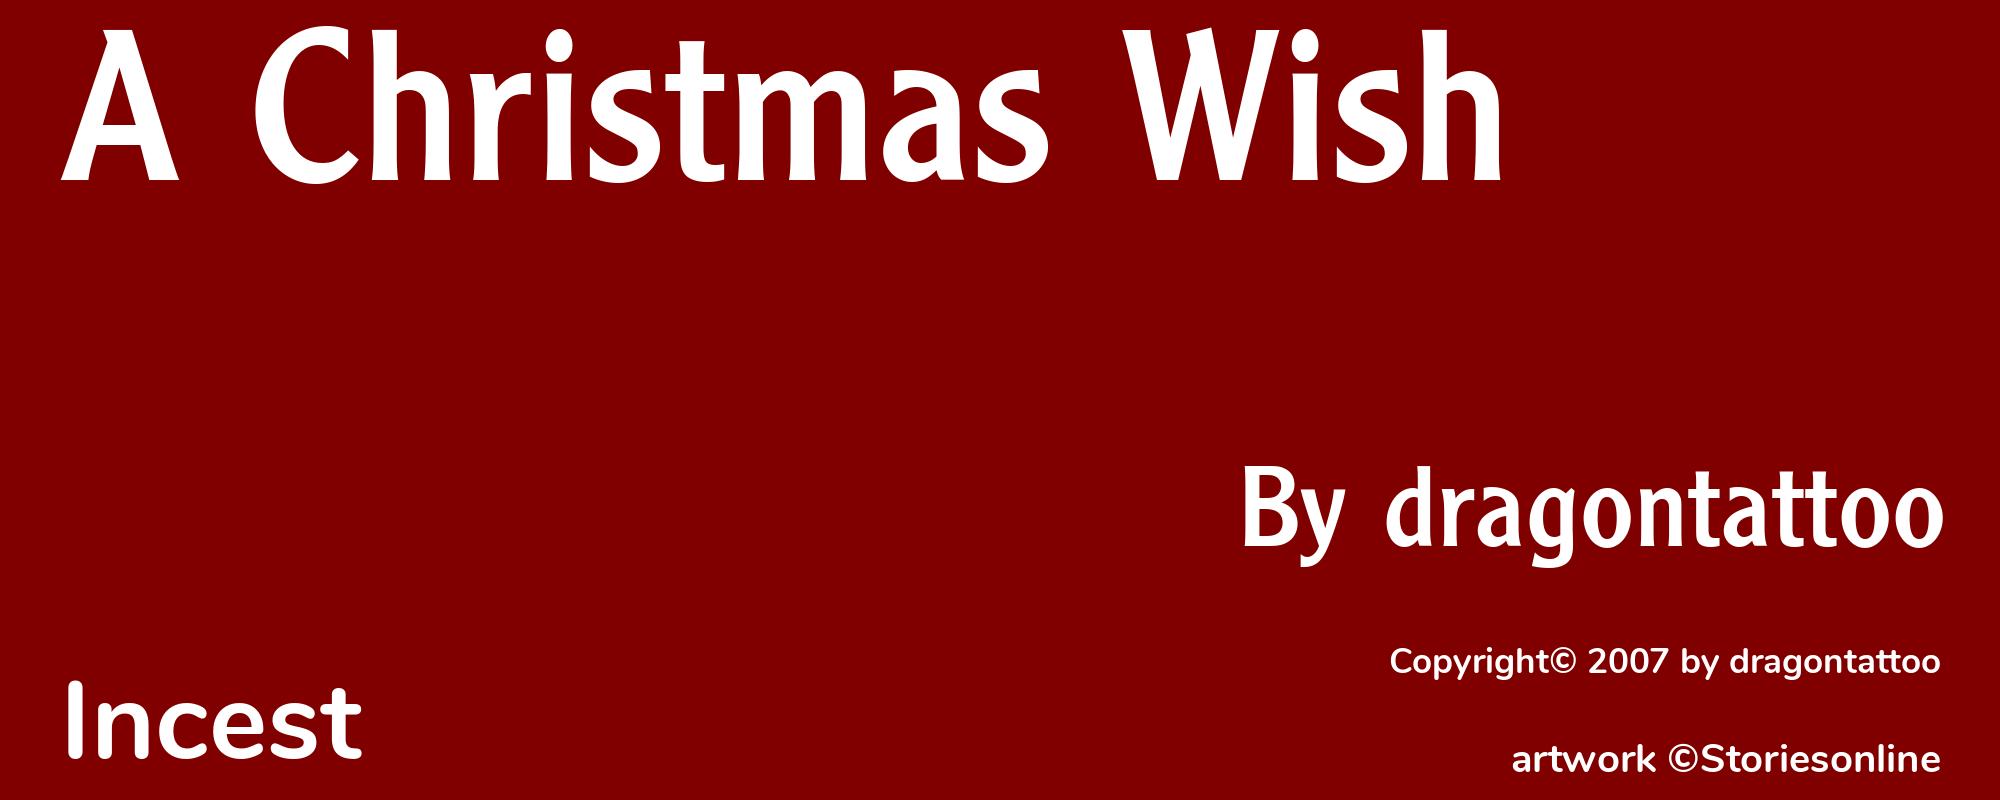 A Christmas Wish - Cover